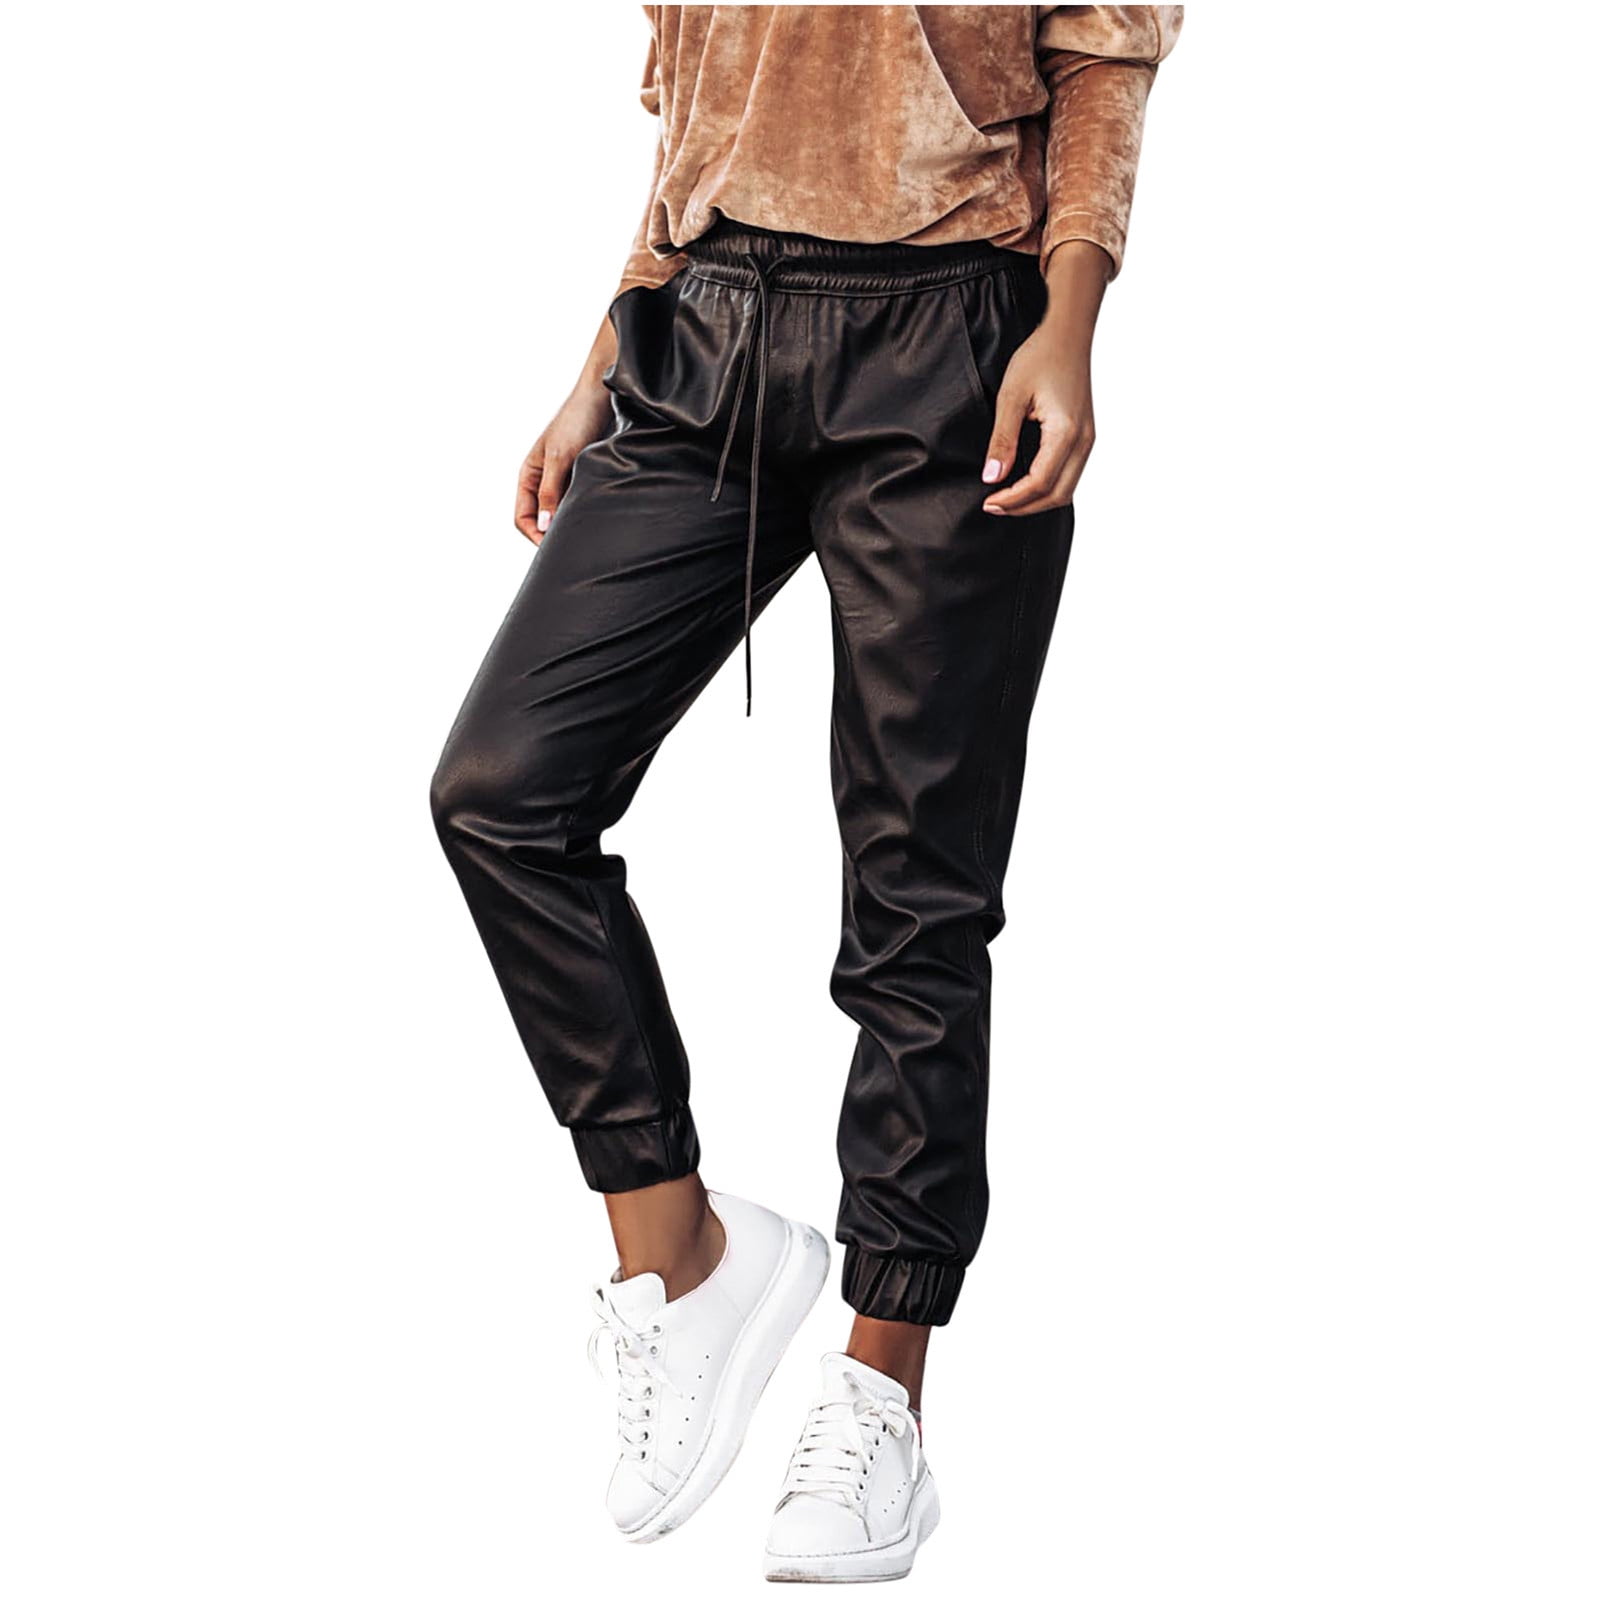 Wholesale leather pants club outfit for Sleep and Well-Being –